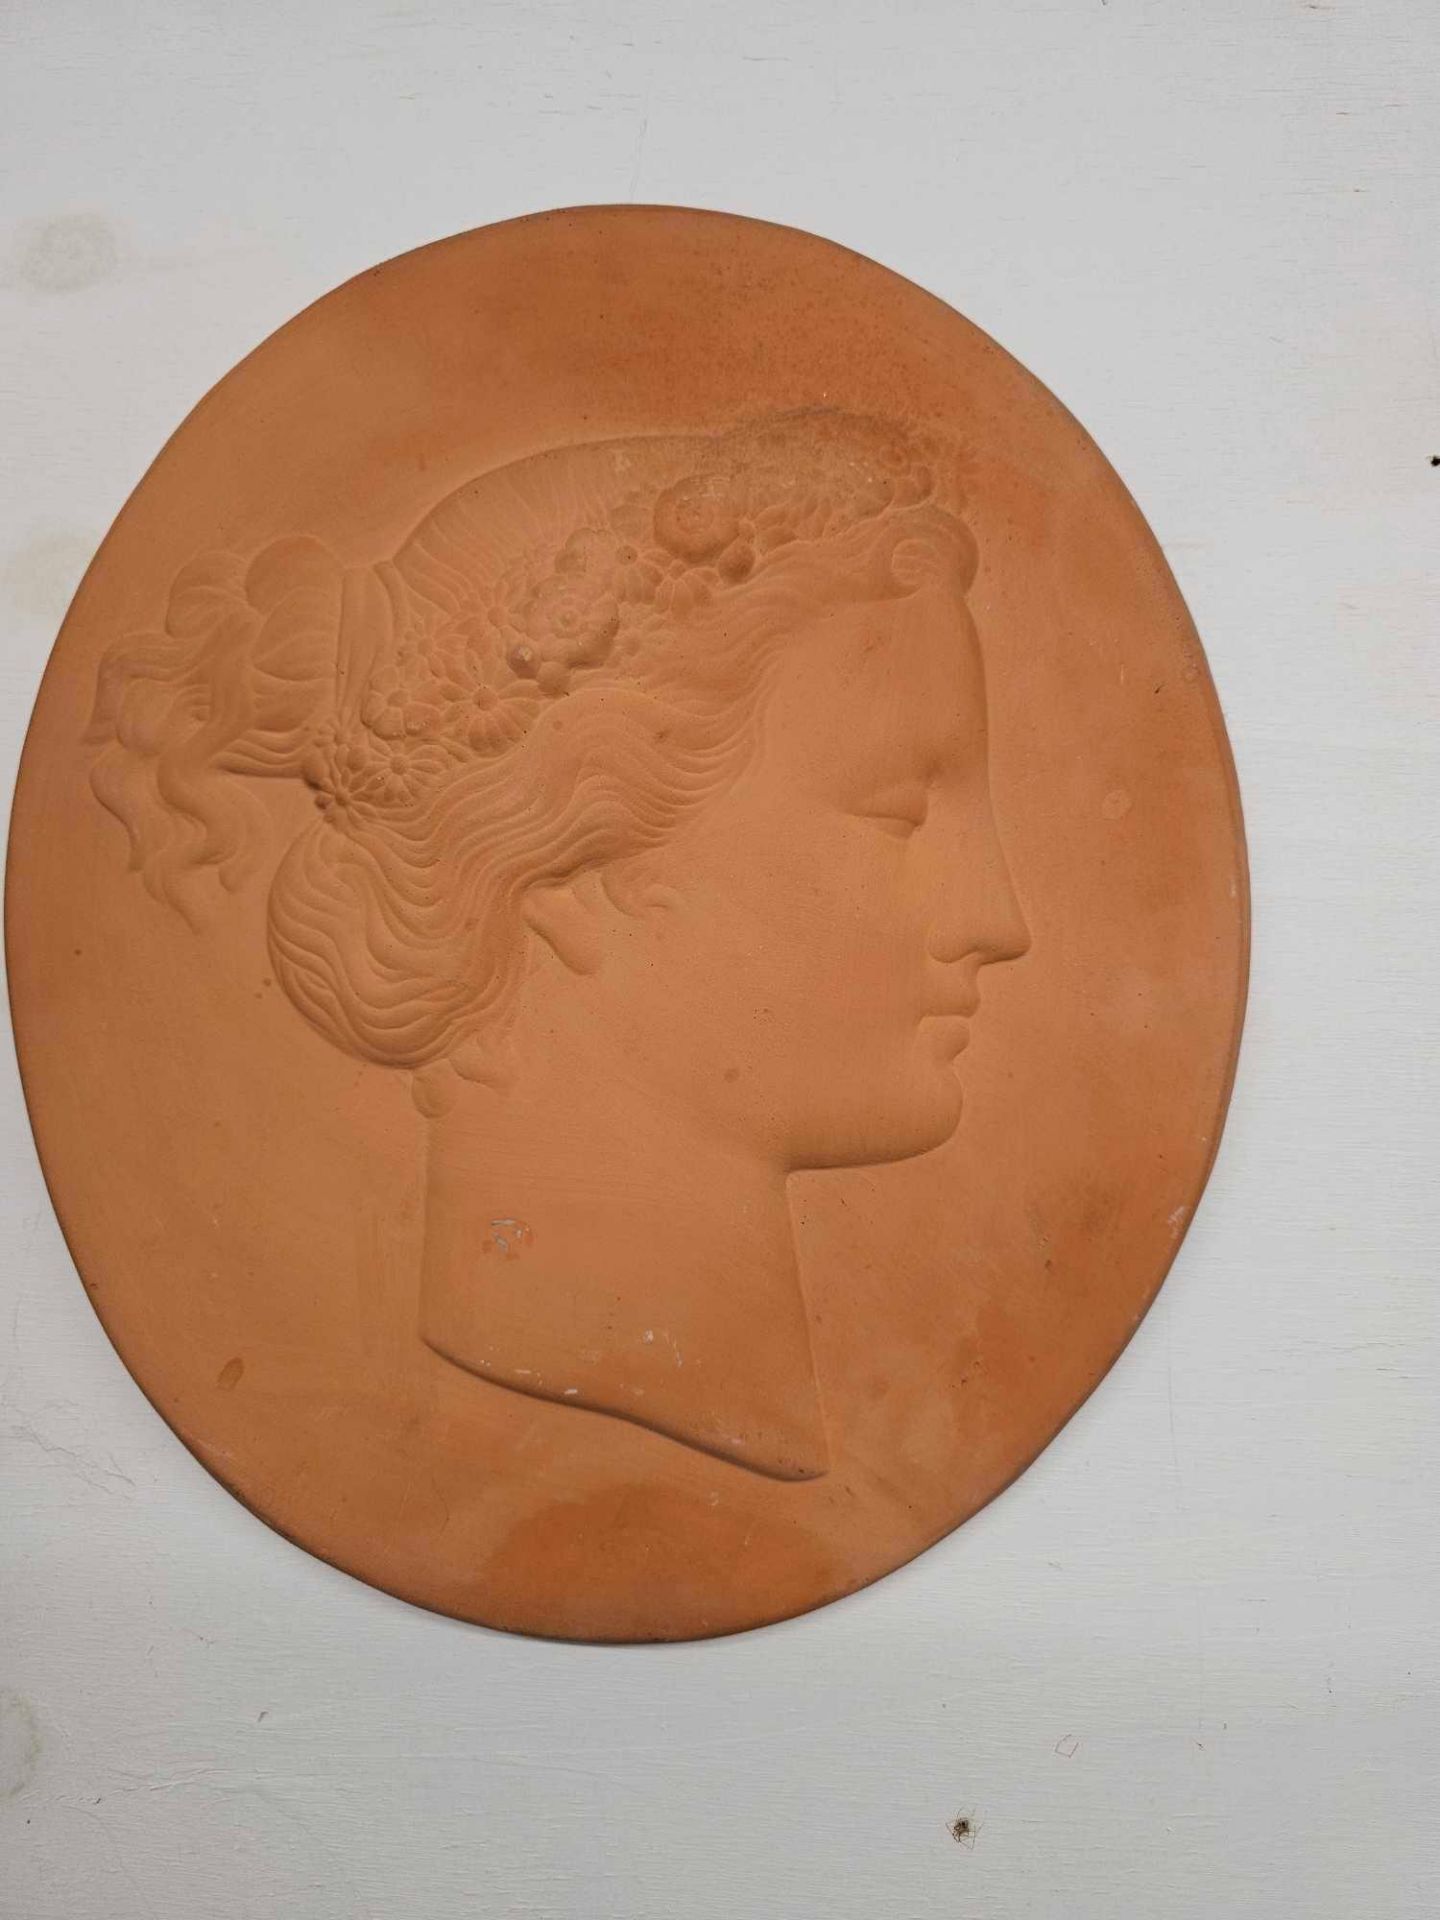 A Set Of 3 x Terracotta Wall Plaques Each With A Classic Relief Scene1 x 33 x 33 And 2 x 34 x 39cm